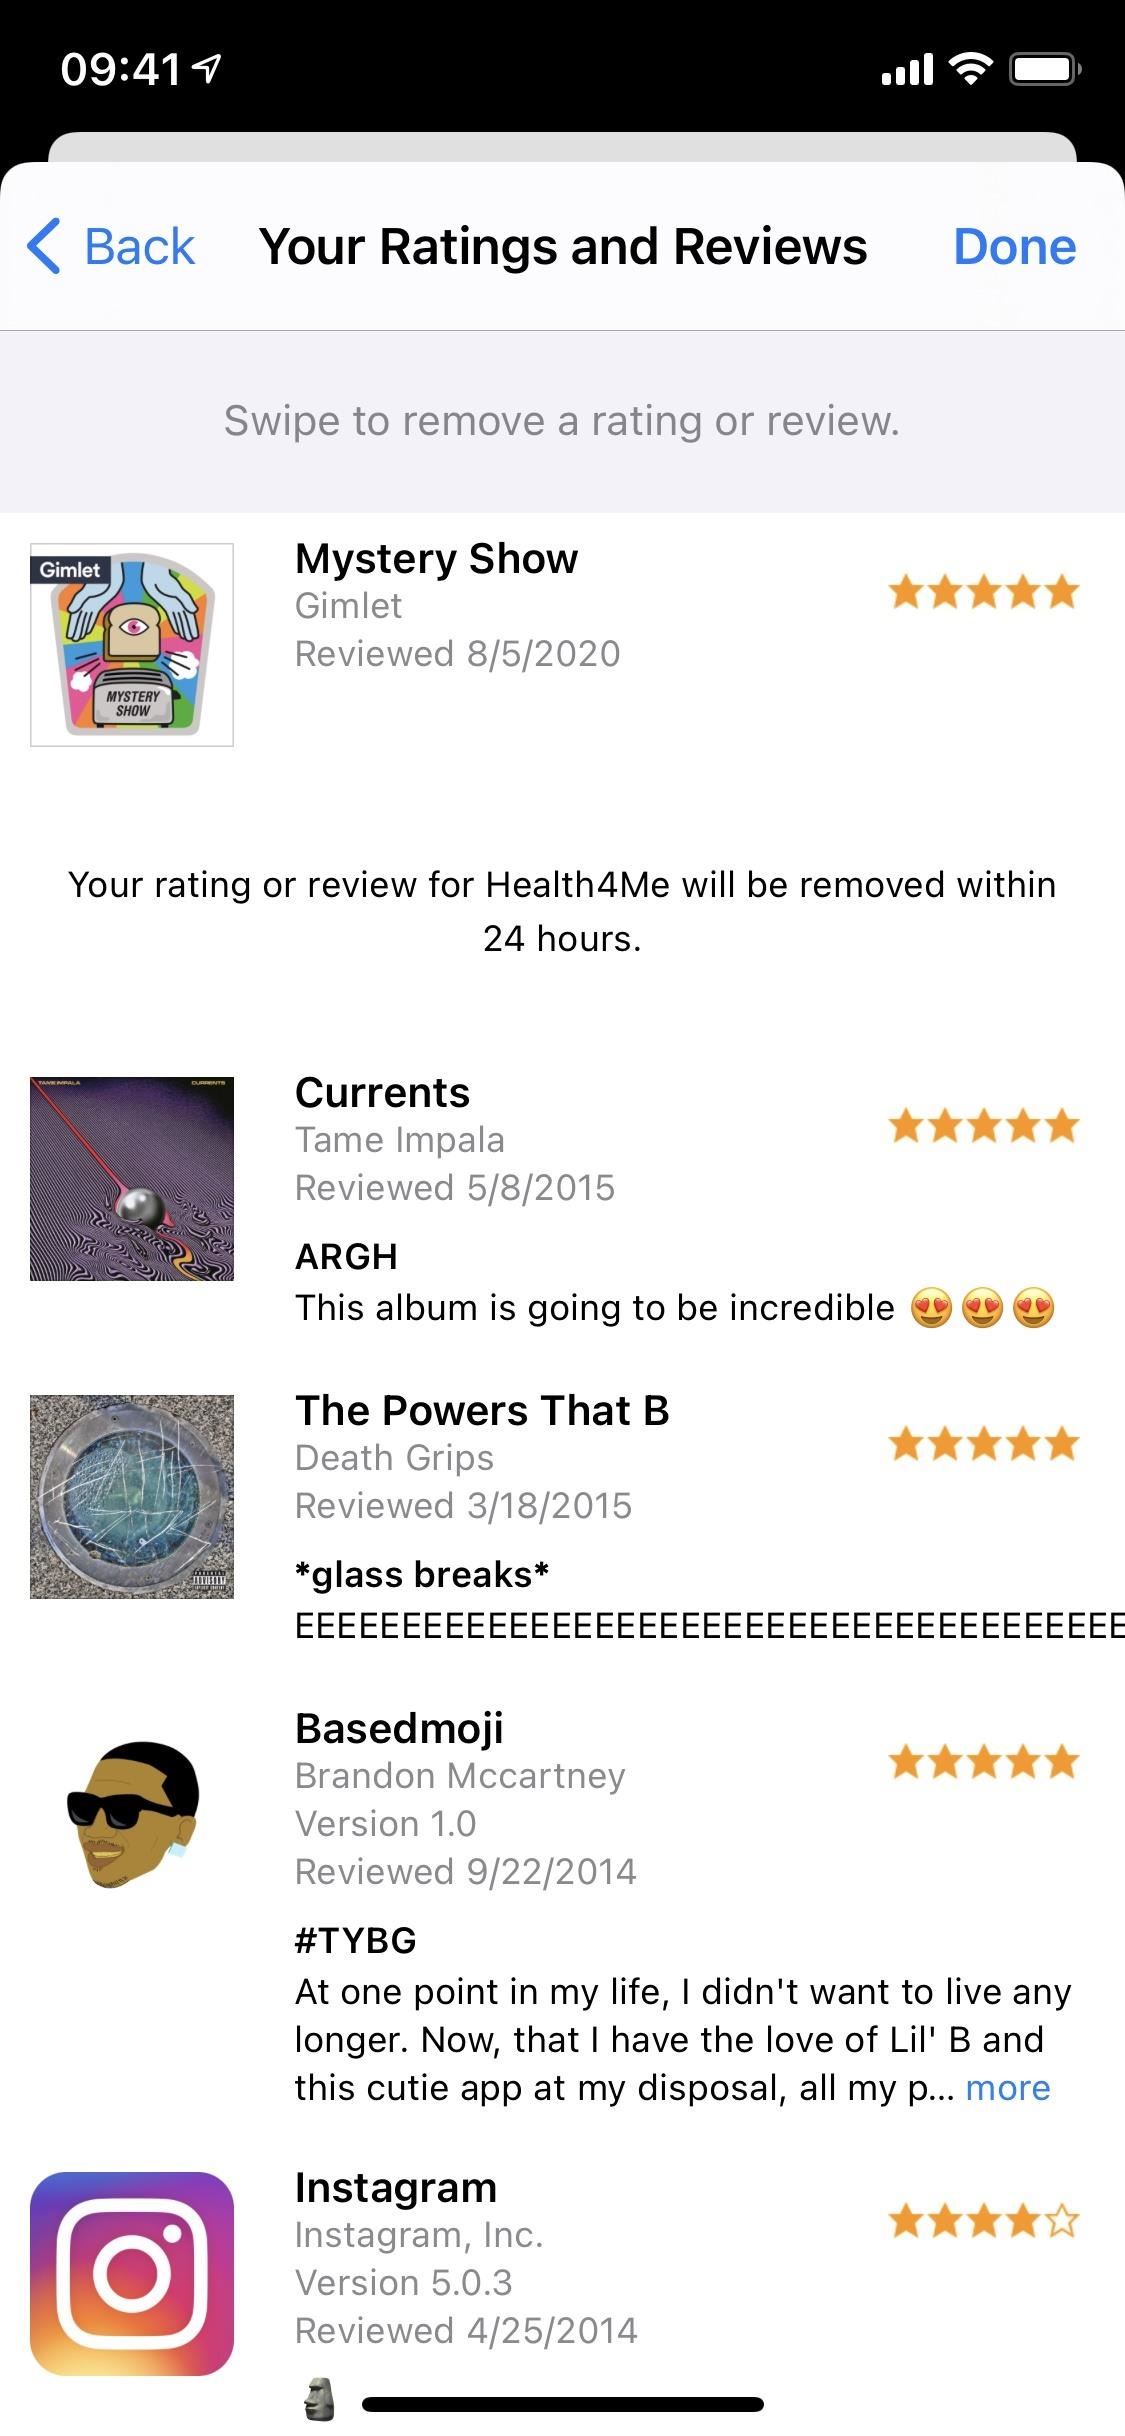 Apple Lets You See All the Ratings & Reviews You've Ever Given Apps, Games, Movies, TV, Music, Podcasts & Books